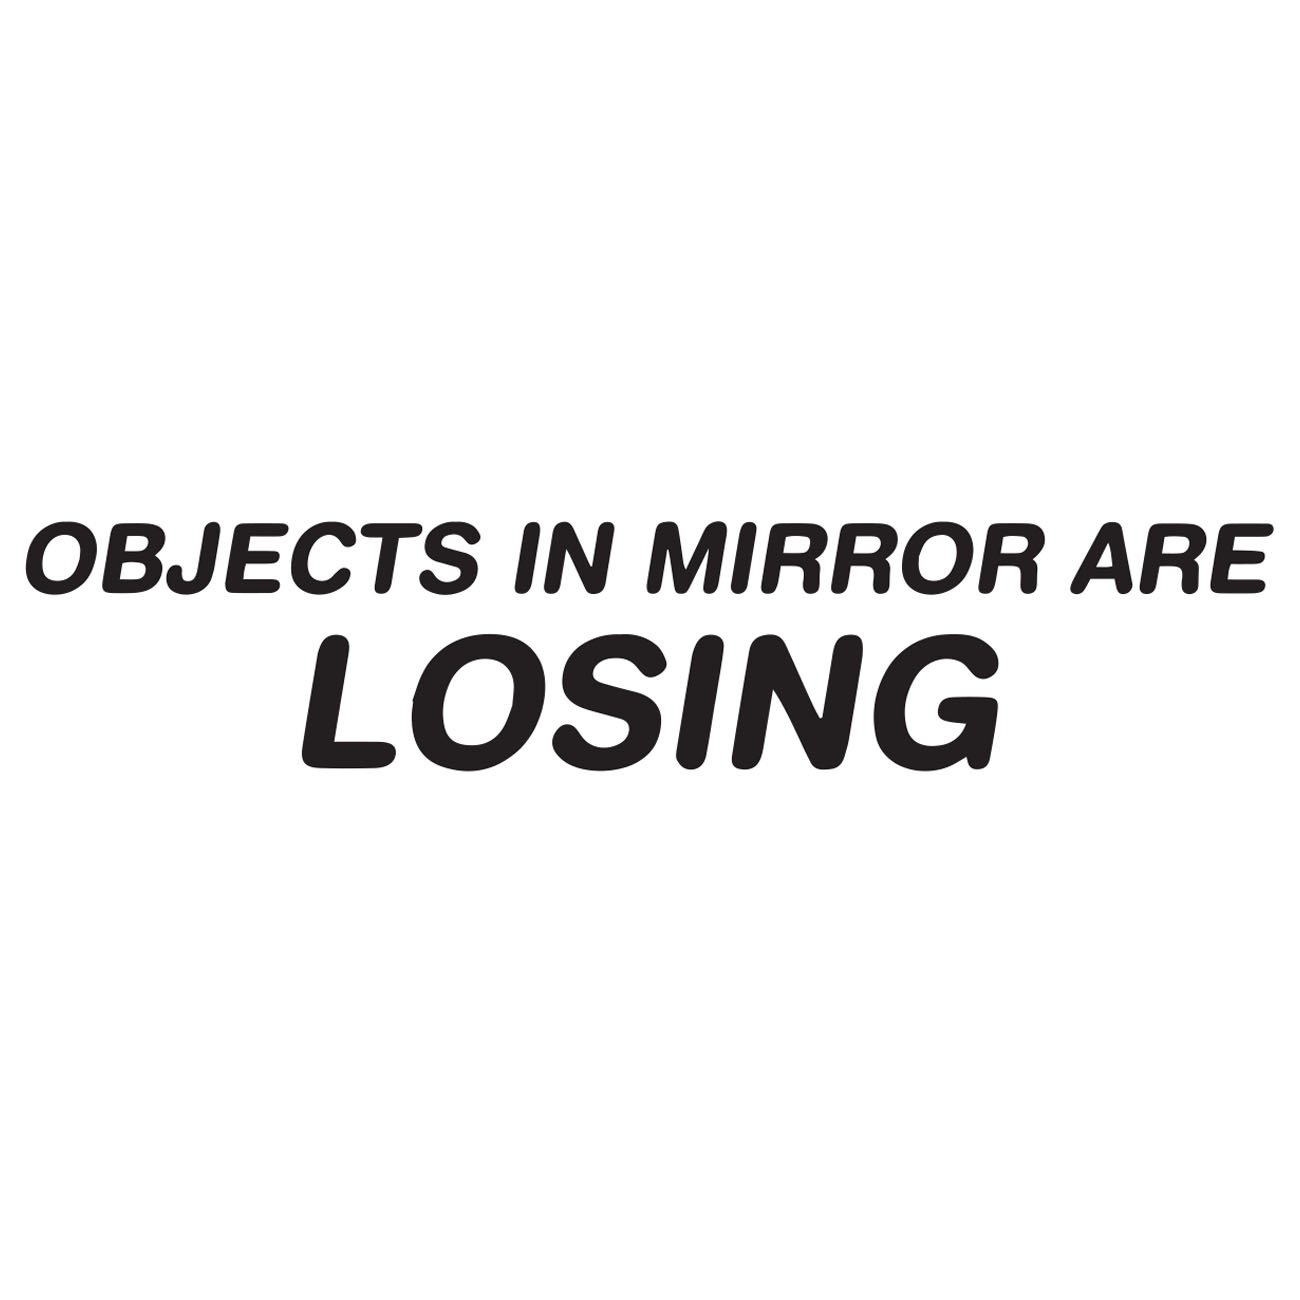 Objects in mirror are losing 2